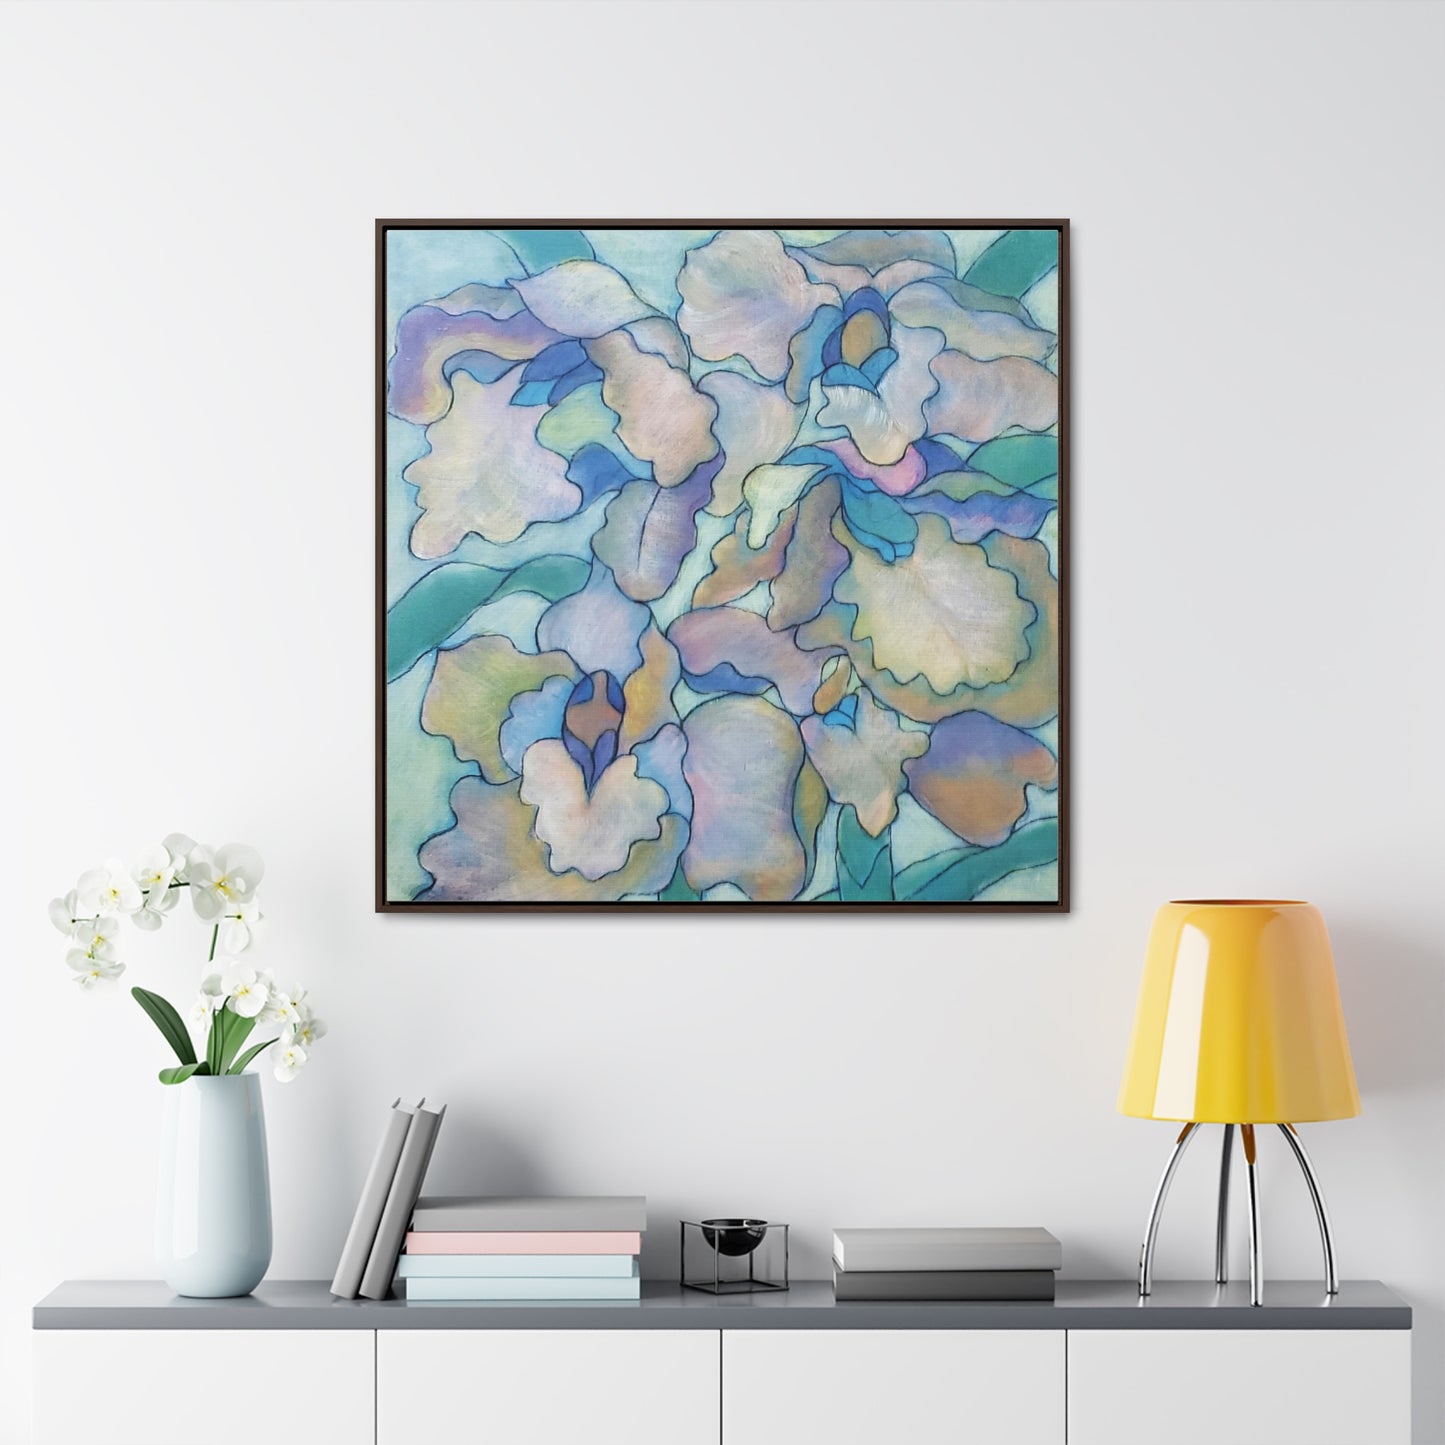 The art piece "Orchid Frenzy" by Yi-li Chin Ward exudes elegance and extravagance. The orchid plant is globally recognized for its captivating beauty and allure, and this piece captures its essence perfectly.